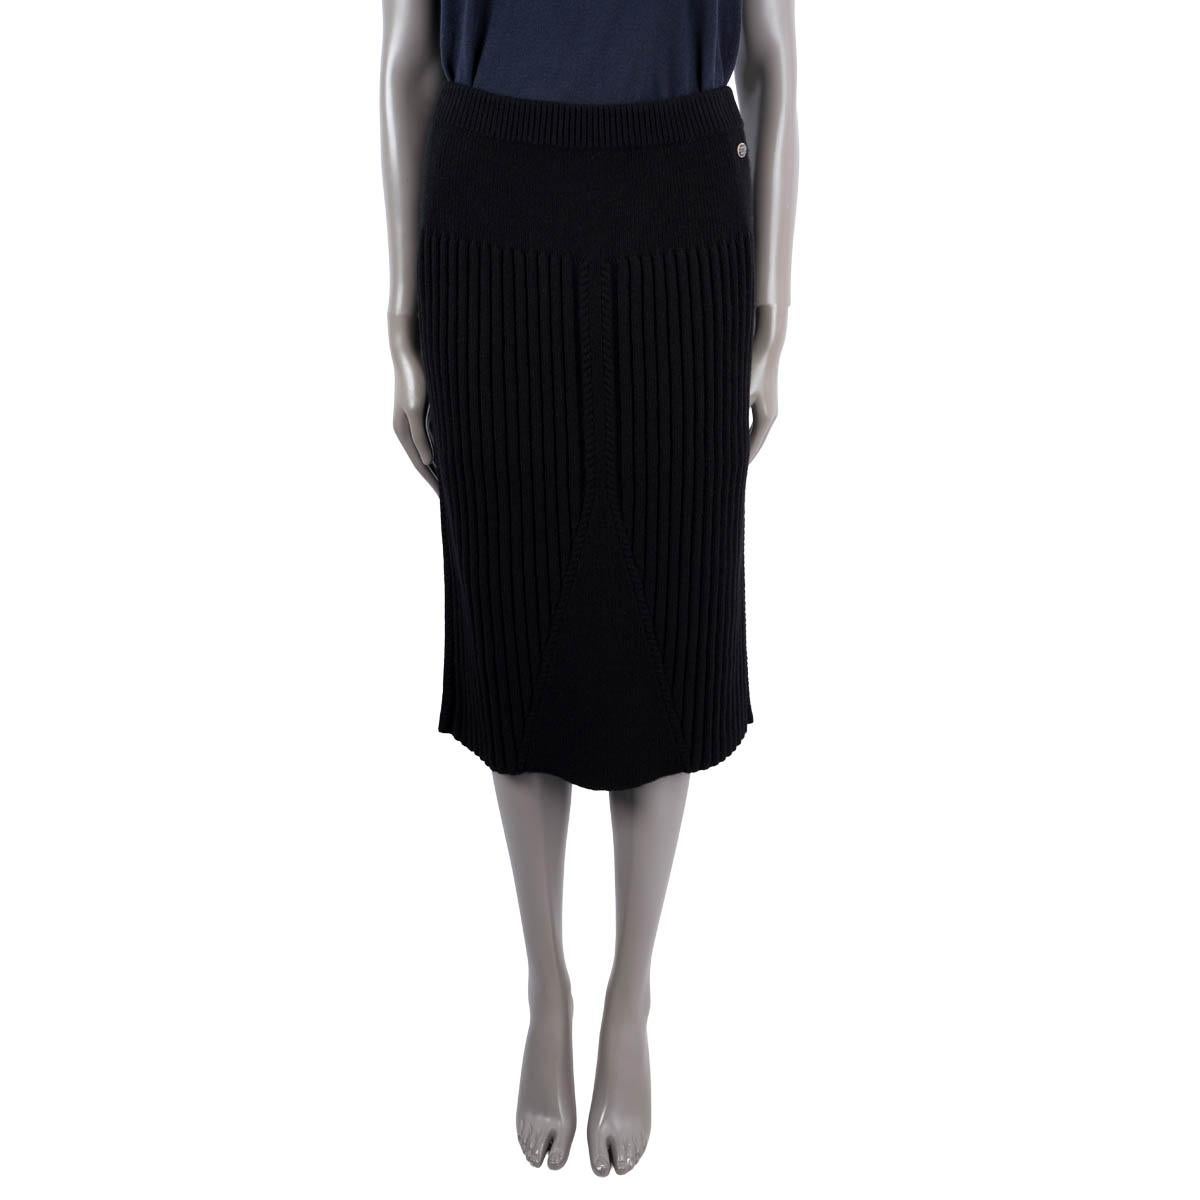 100% authentic Chanel rib-knit skirt in black cashmere (100%). Features a triangle panel with braid-knit outline and a logo button on the waist. Elastic waist band. Has been worn and is in excellent condition.

2016